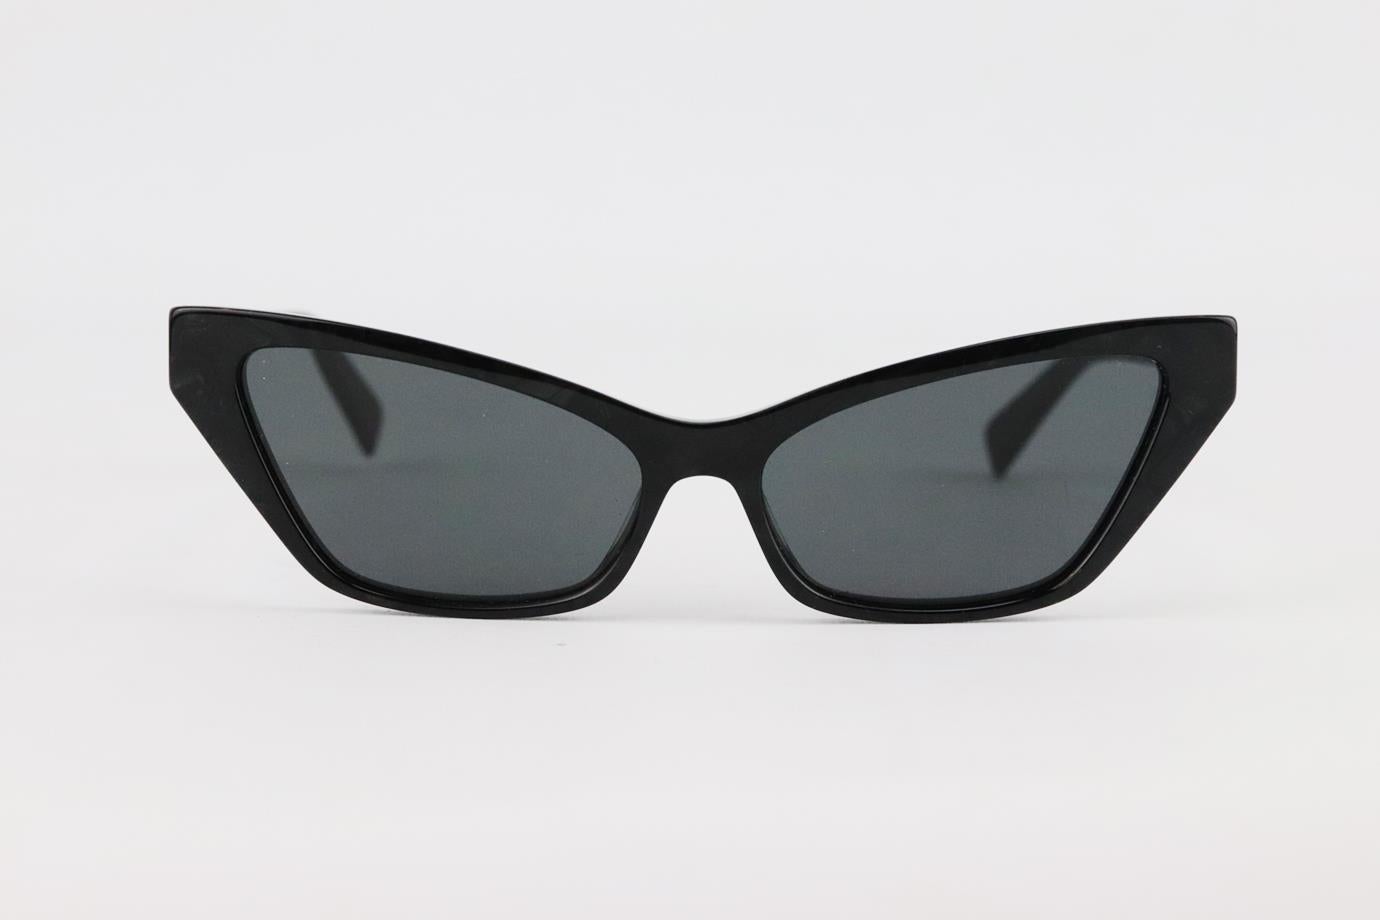 Alain Mikli cat eye acetate sunglasses. Tonal-black. Does not come with case. Style code: A05036 003/87. Lens size: 57 mm. Arm size: 140 mm. Bridge size: 15 mm. Very good condition - Light marks; see pictures.
